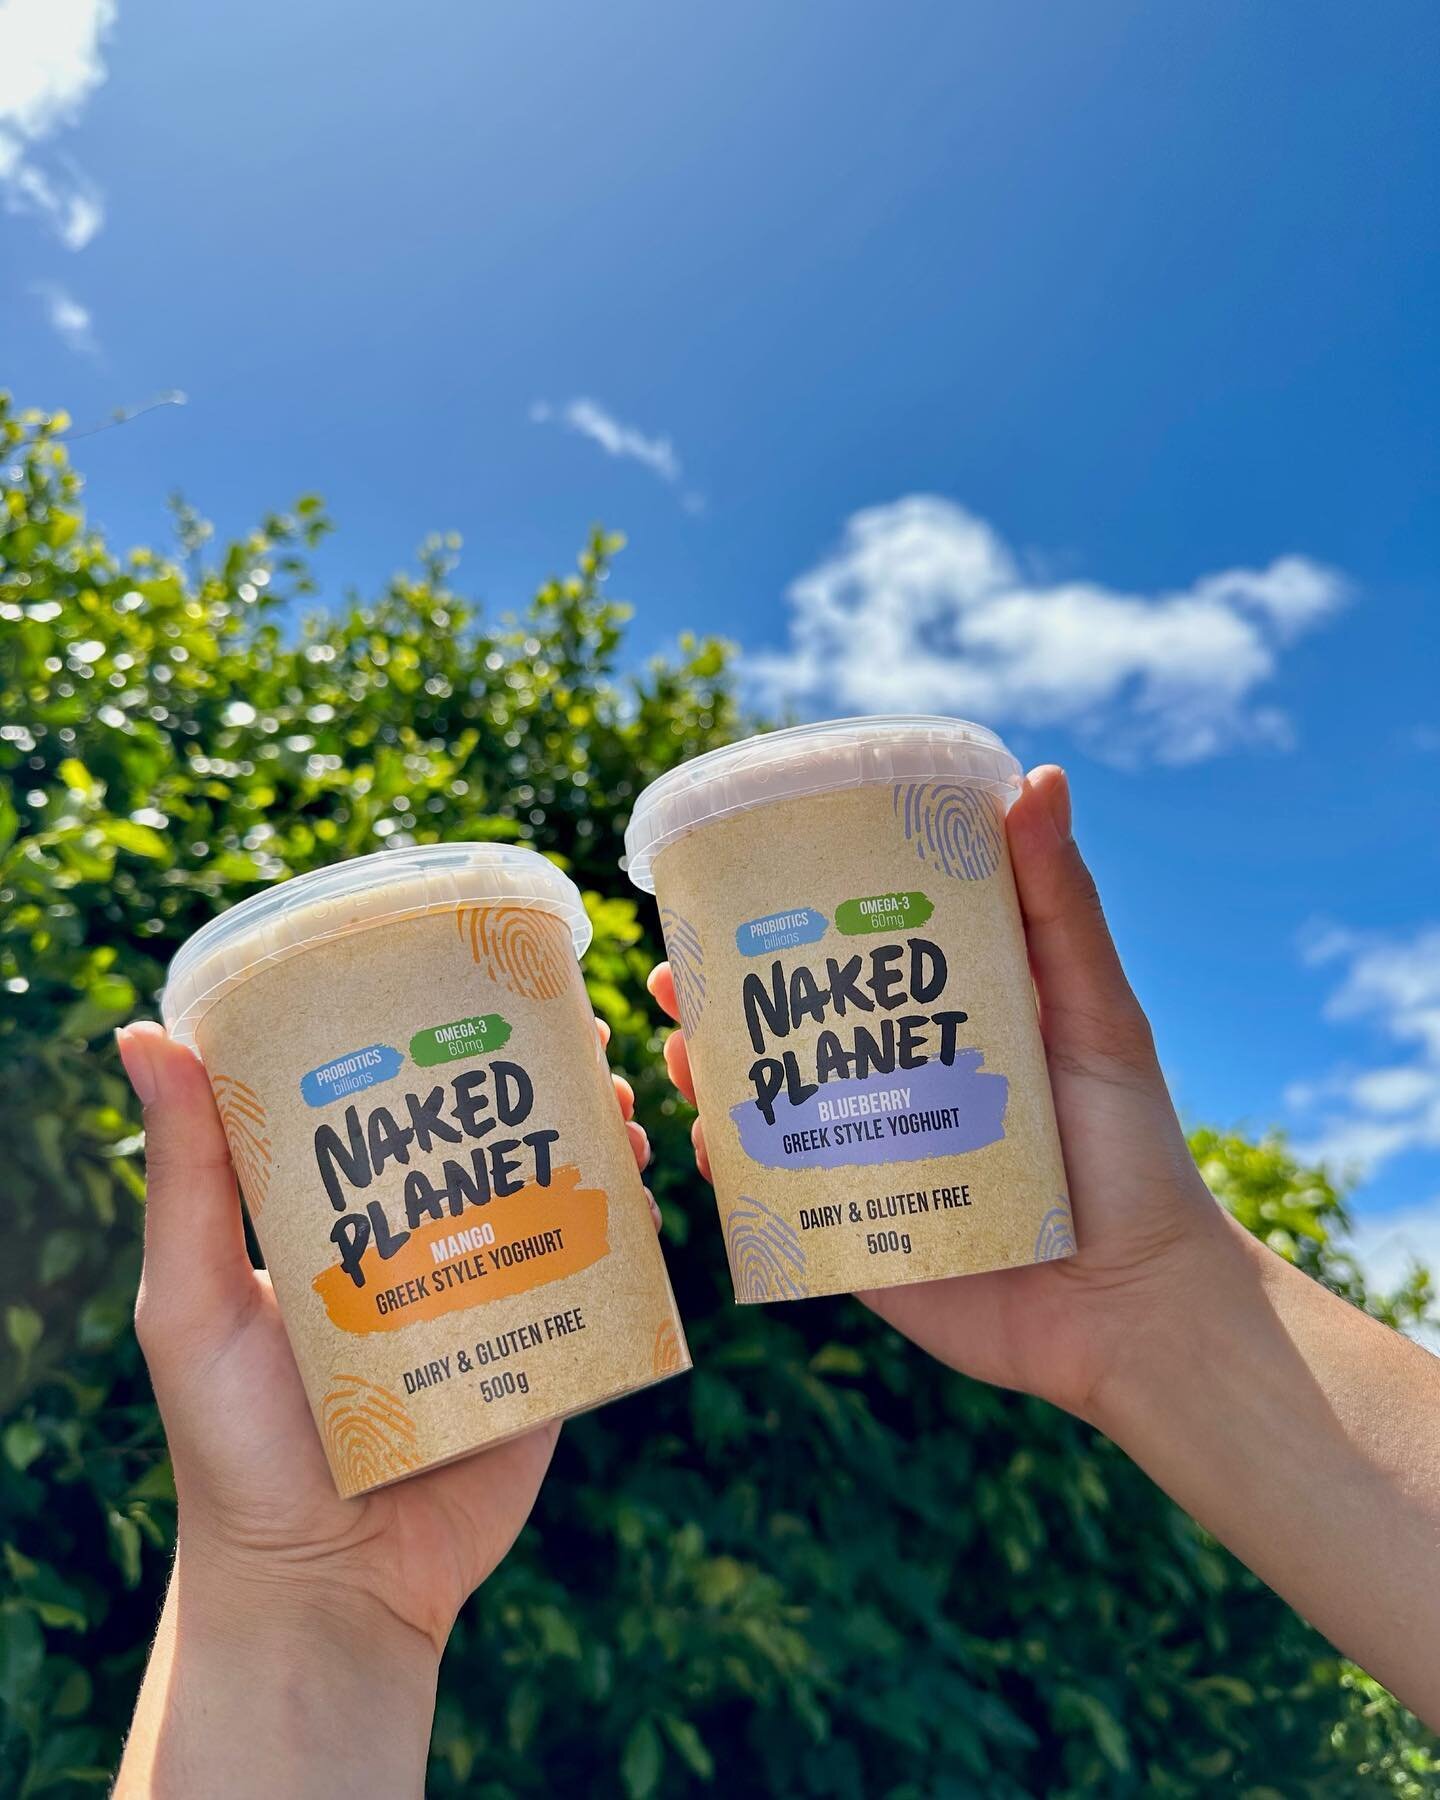 Suns out, Nakeds out😜 Tag your Naked Planet bestie 💚